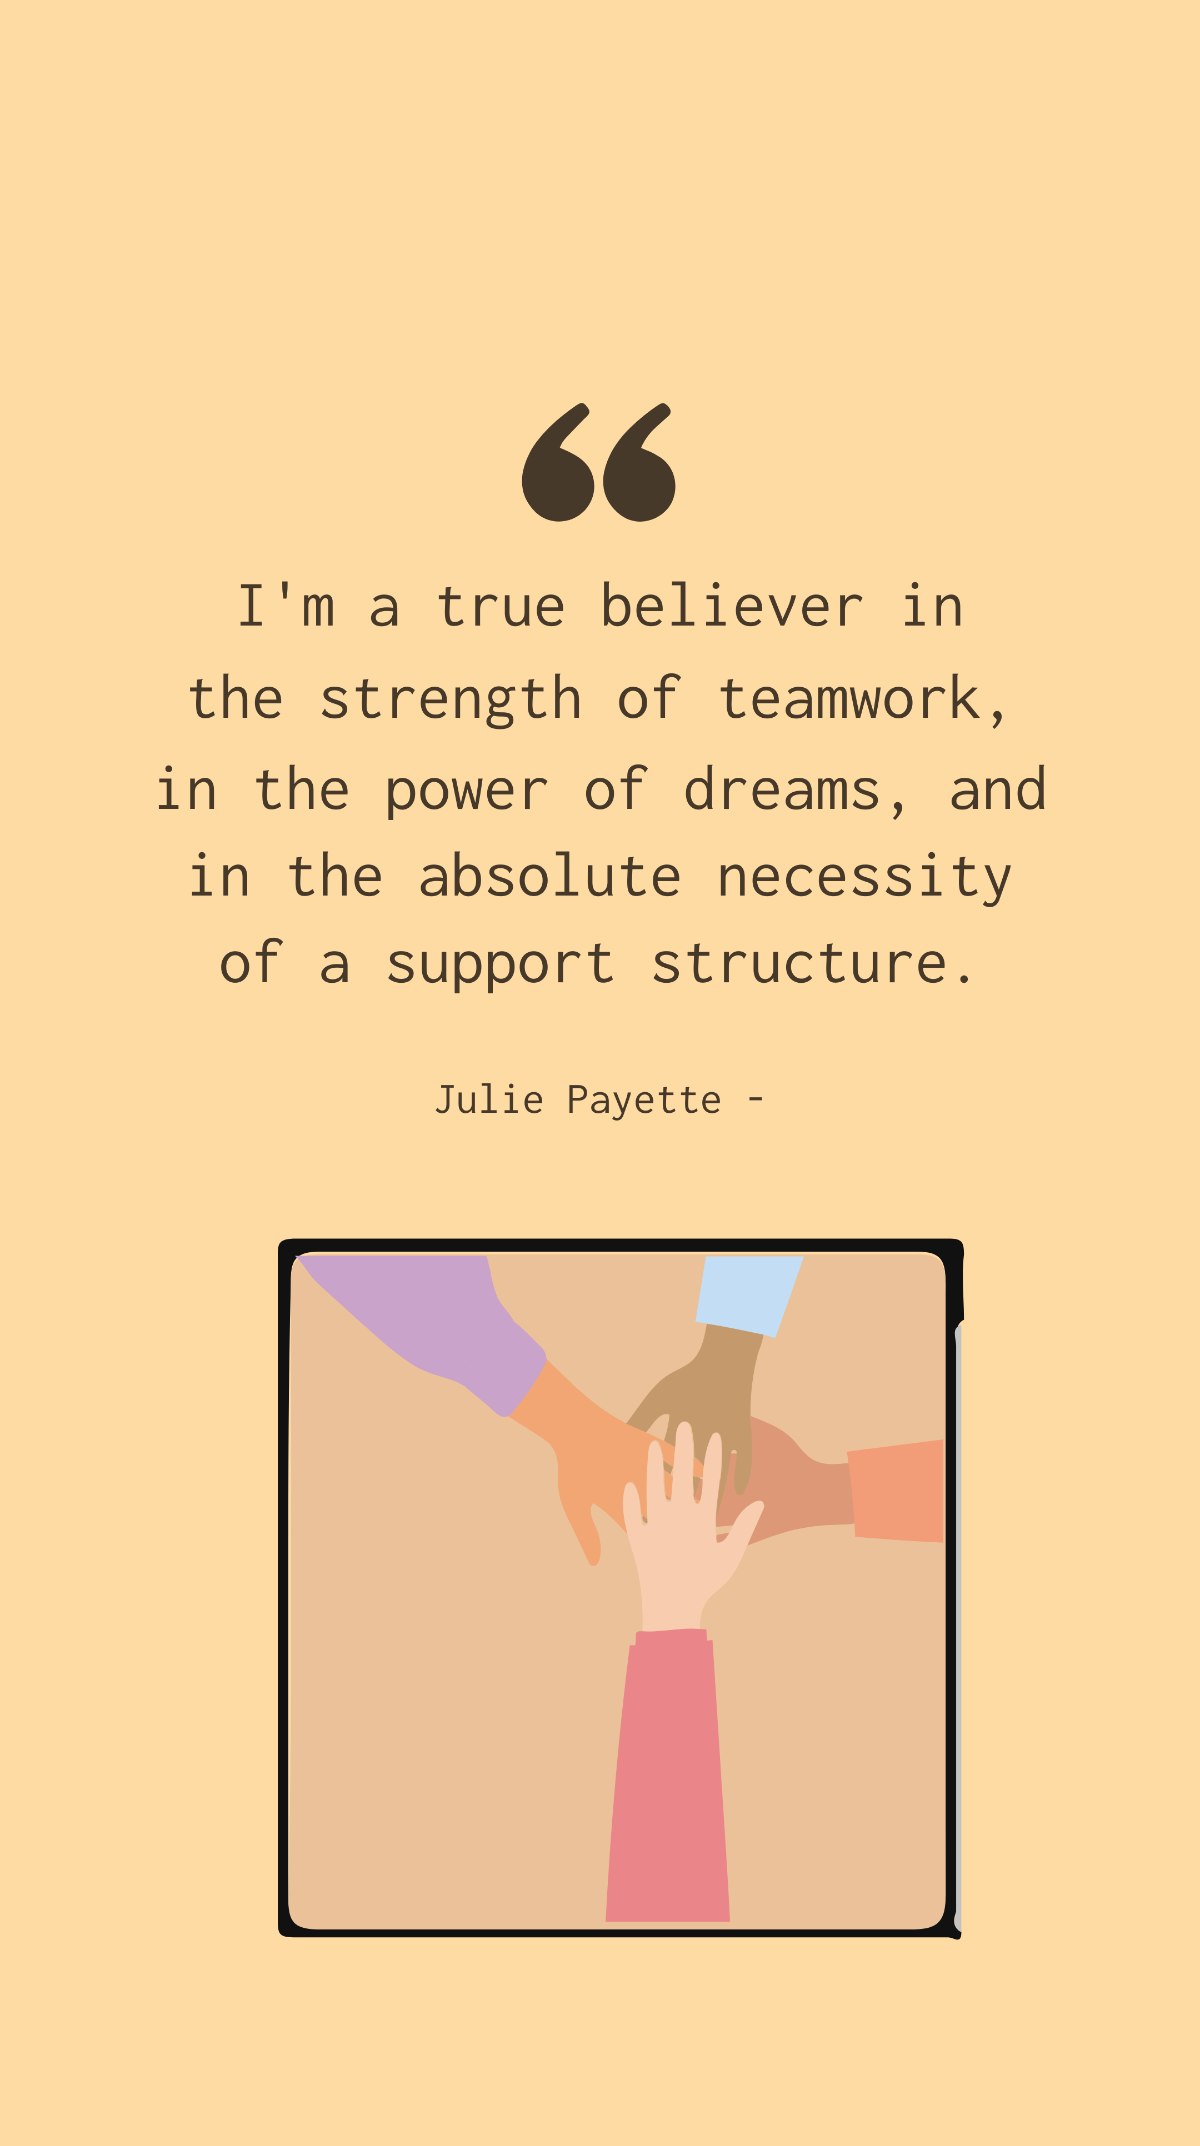 Free Julie Payette - I'm a true believer in the strength of teamwork, in the power of dreams, and in the absolute necessity of a support structure. Template